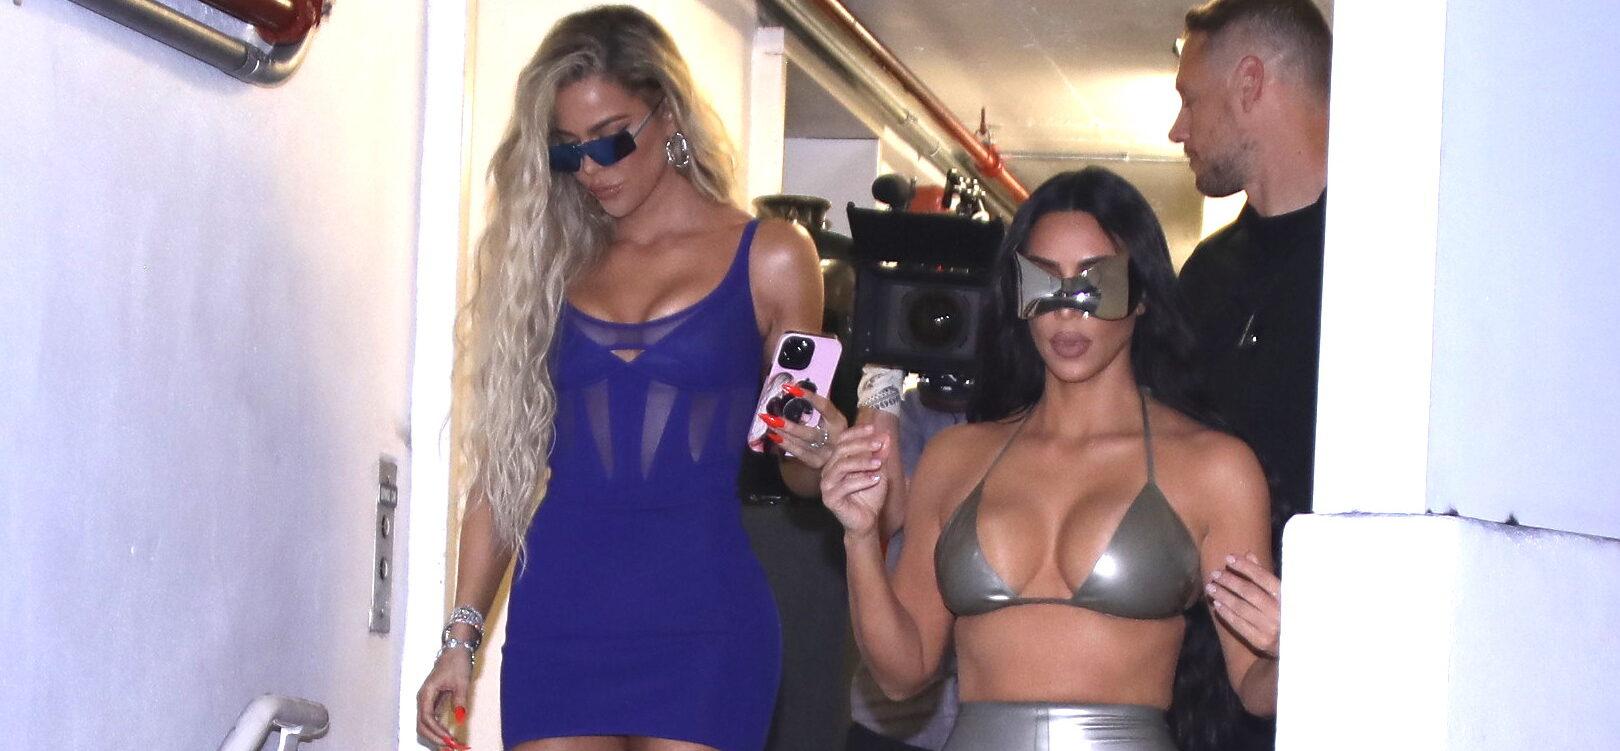 Kim Kardashian and sister Khloe Kardashian head out for a night on the town in Miami in their stunning looks during Spring Break in South Beach